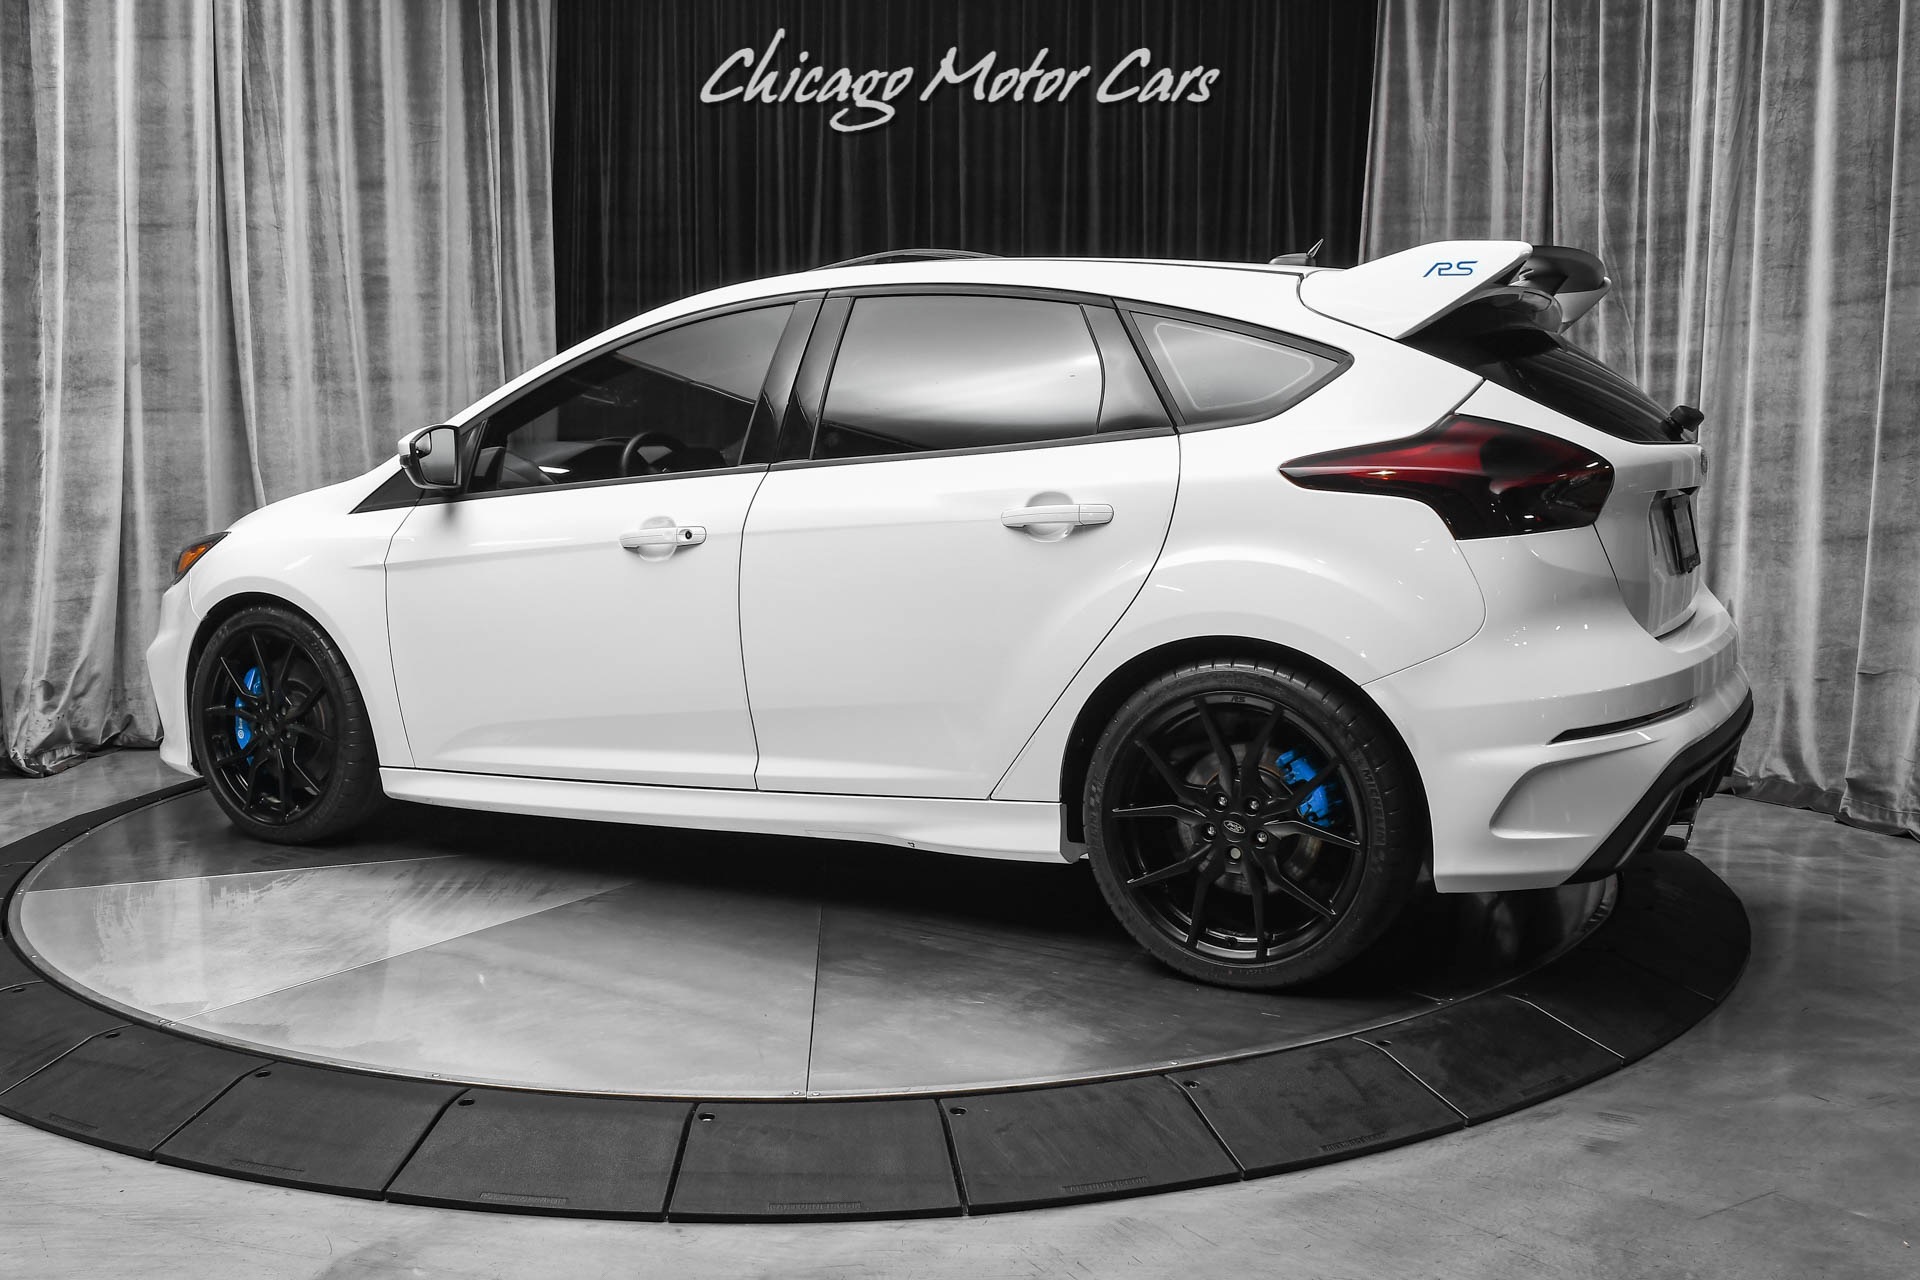 Used 2016 Focus RS Hatchback Frozen White RS2 PACKAGE! Manual! Stunning Condition! For Sale Pricing) | Chicago Motor Cars Stock